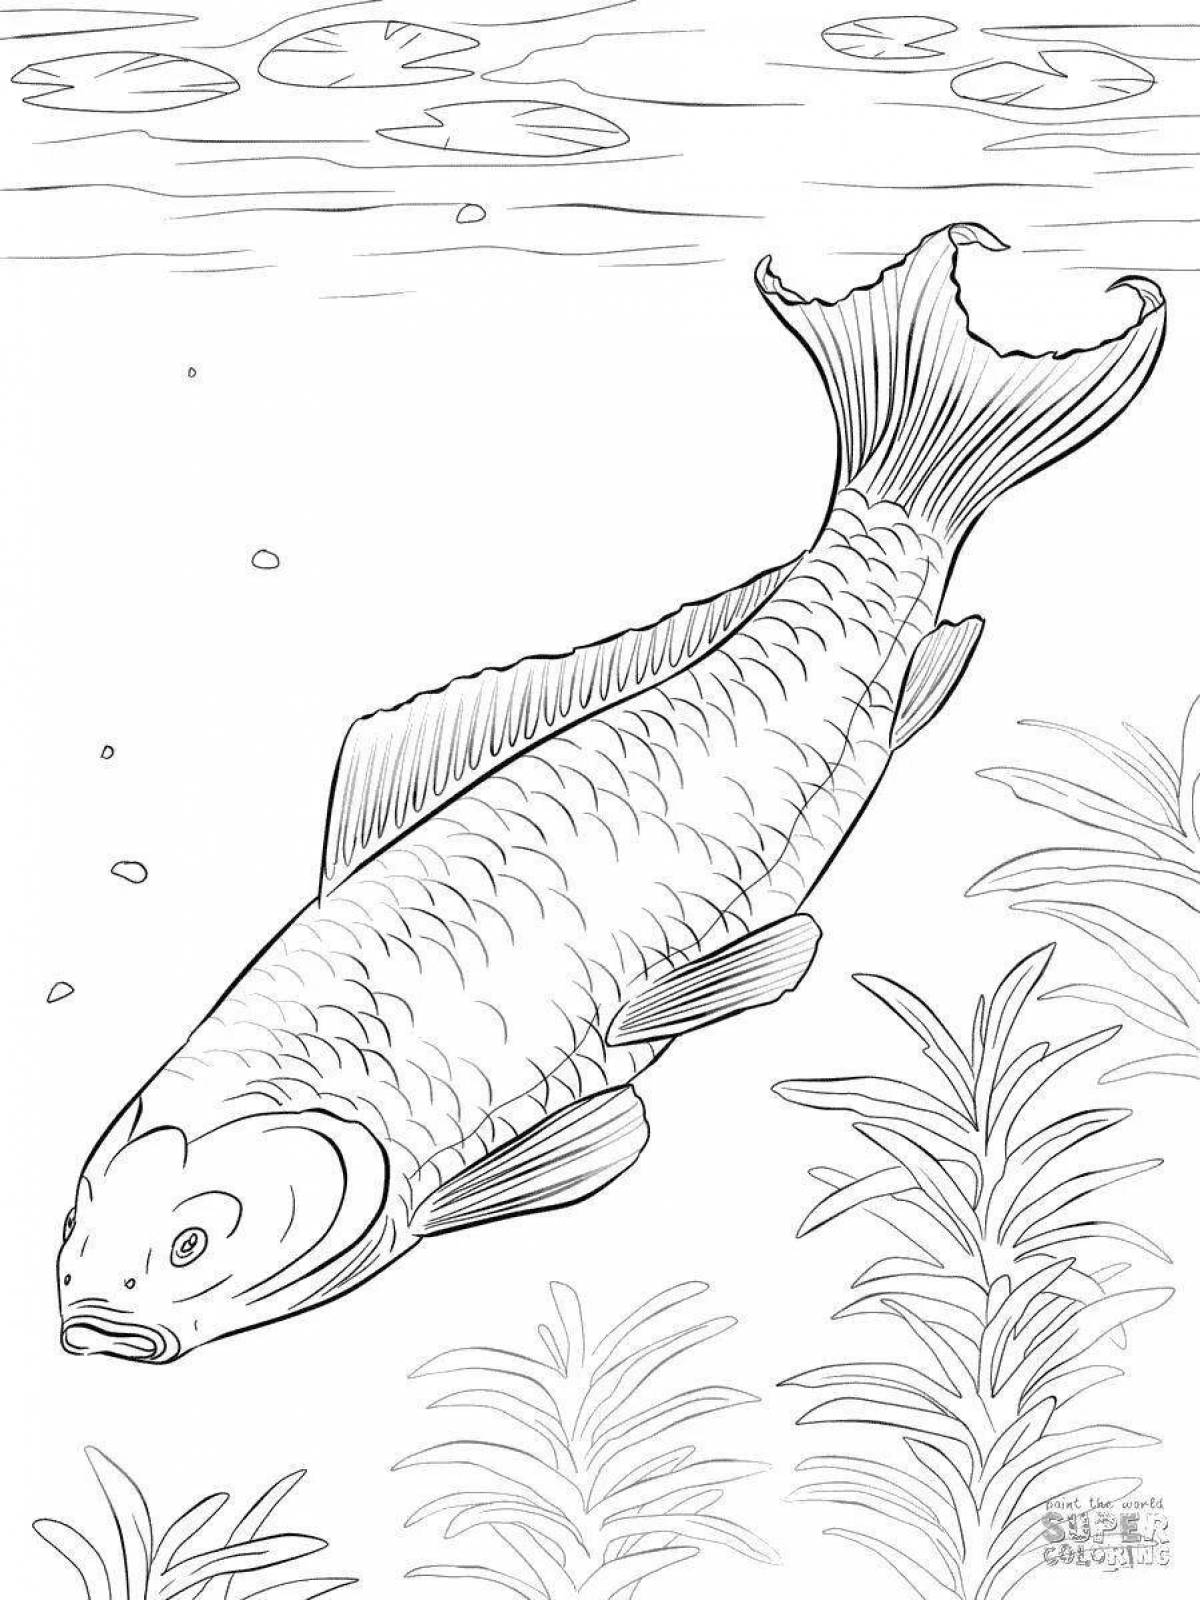 Colorful river fish coloring page